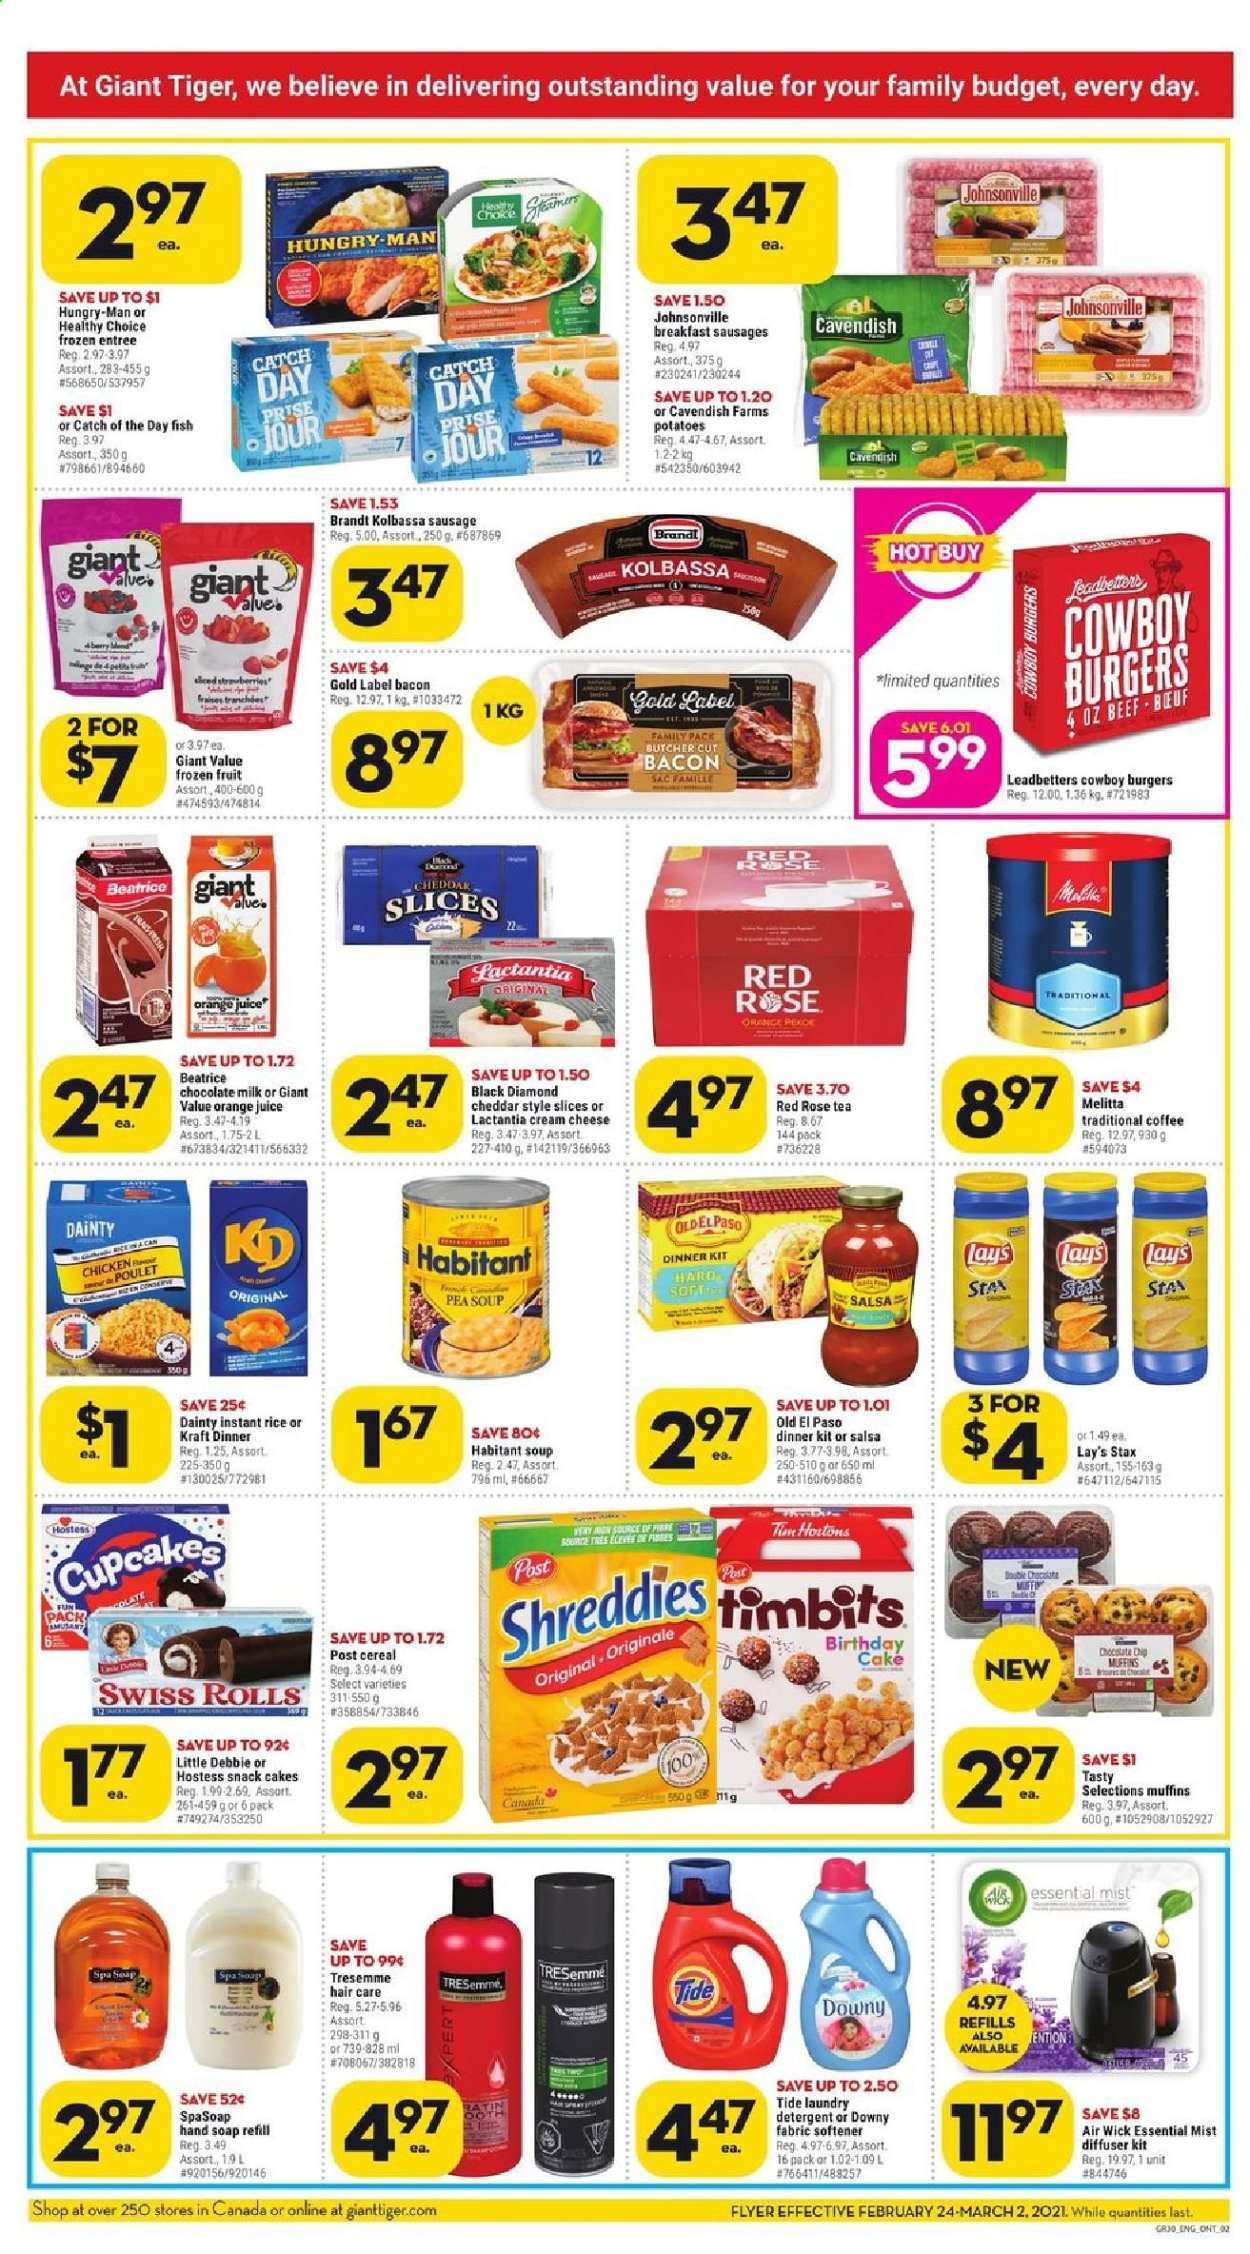 thumbnail - Giant Tiger Flyer - February 24, 2021 - March 02, 2021 - Sales products - cake, Old El Paso, cupcake, muffin, potatoes, fish, soup, hamburger, dinner kit, Healthy Choice, Kraft®, bacon, Johnsonville, sausage, cream cheese, cheddar, cheese, milk, milk chocolate, chocolate chips, snack, Lay’s, cereals, salsa, orange juice, juice, tea, coffee, rosé wine, Tide, fabric softener, laundry detergent, Downy Laundry, hand soap, soap, TRESemmé, diffuser, Air Wick, rose. Page 2.